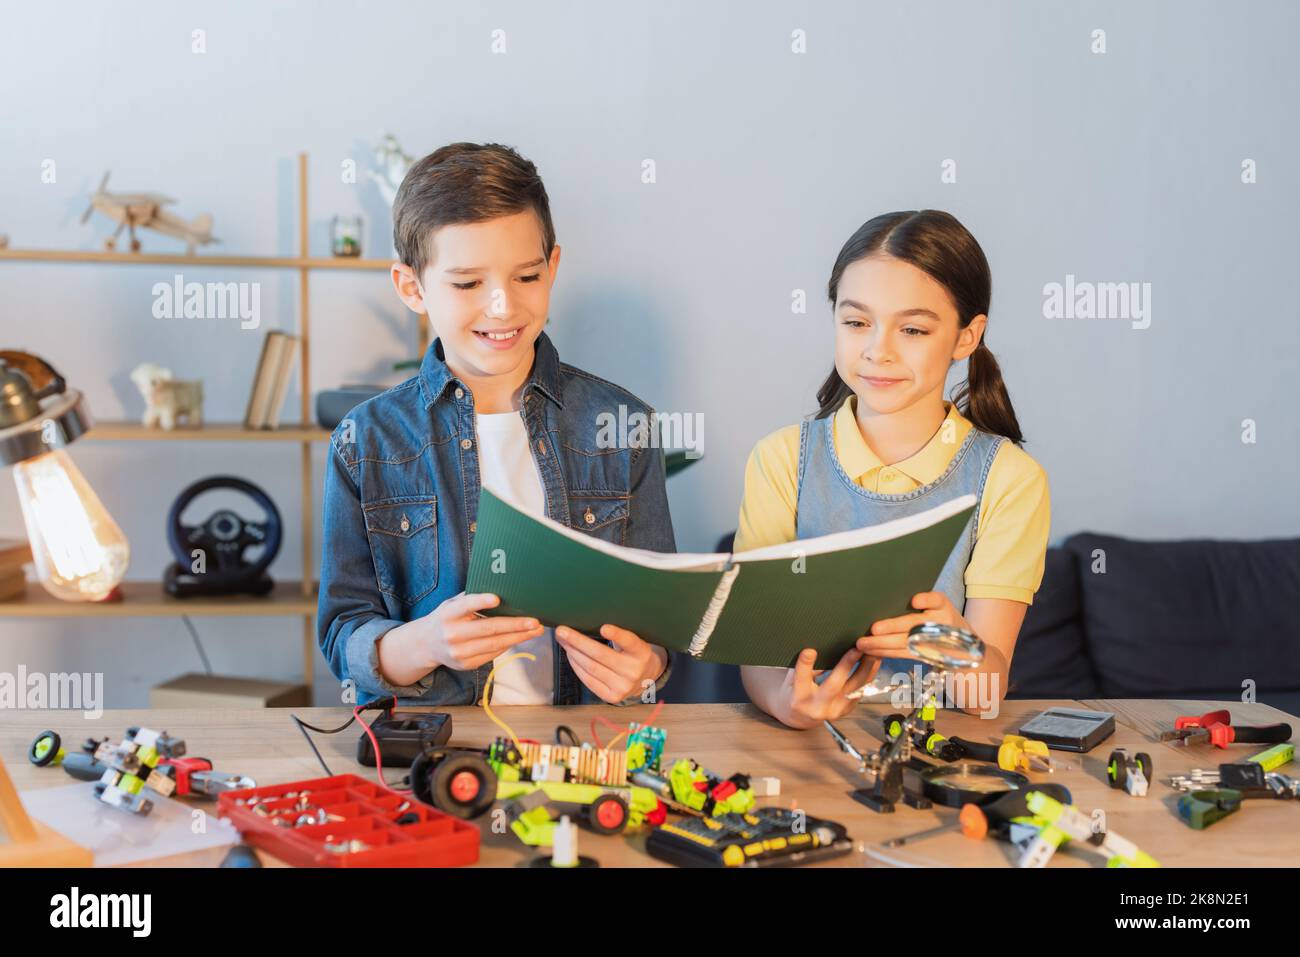 Smiling kids holding notebook near robotic model and tools at home,stock image Stock Photo